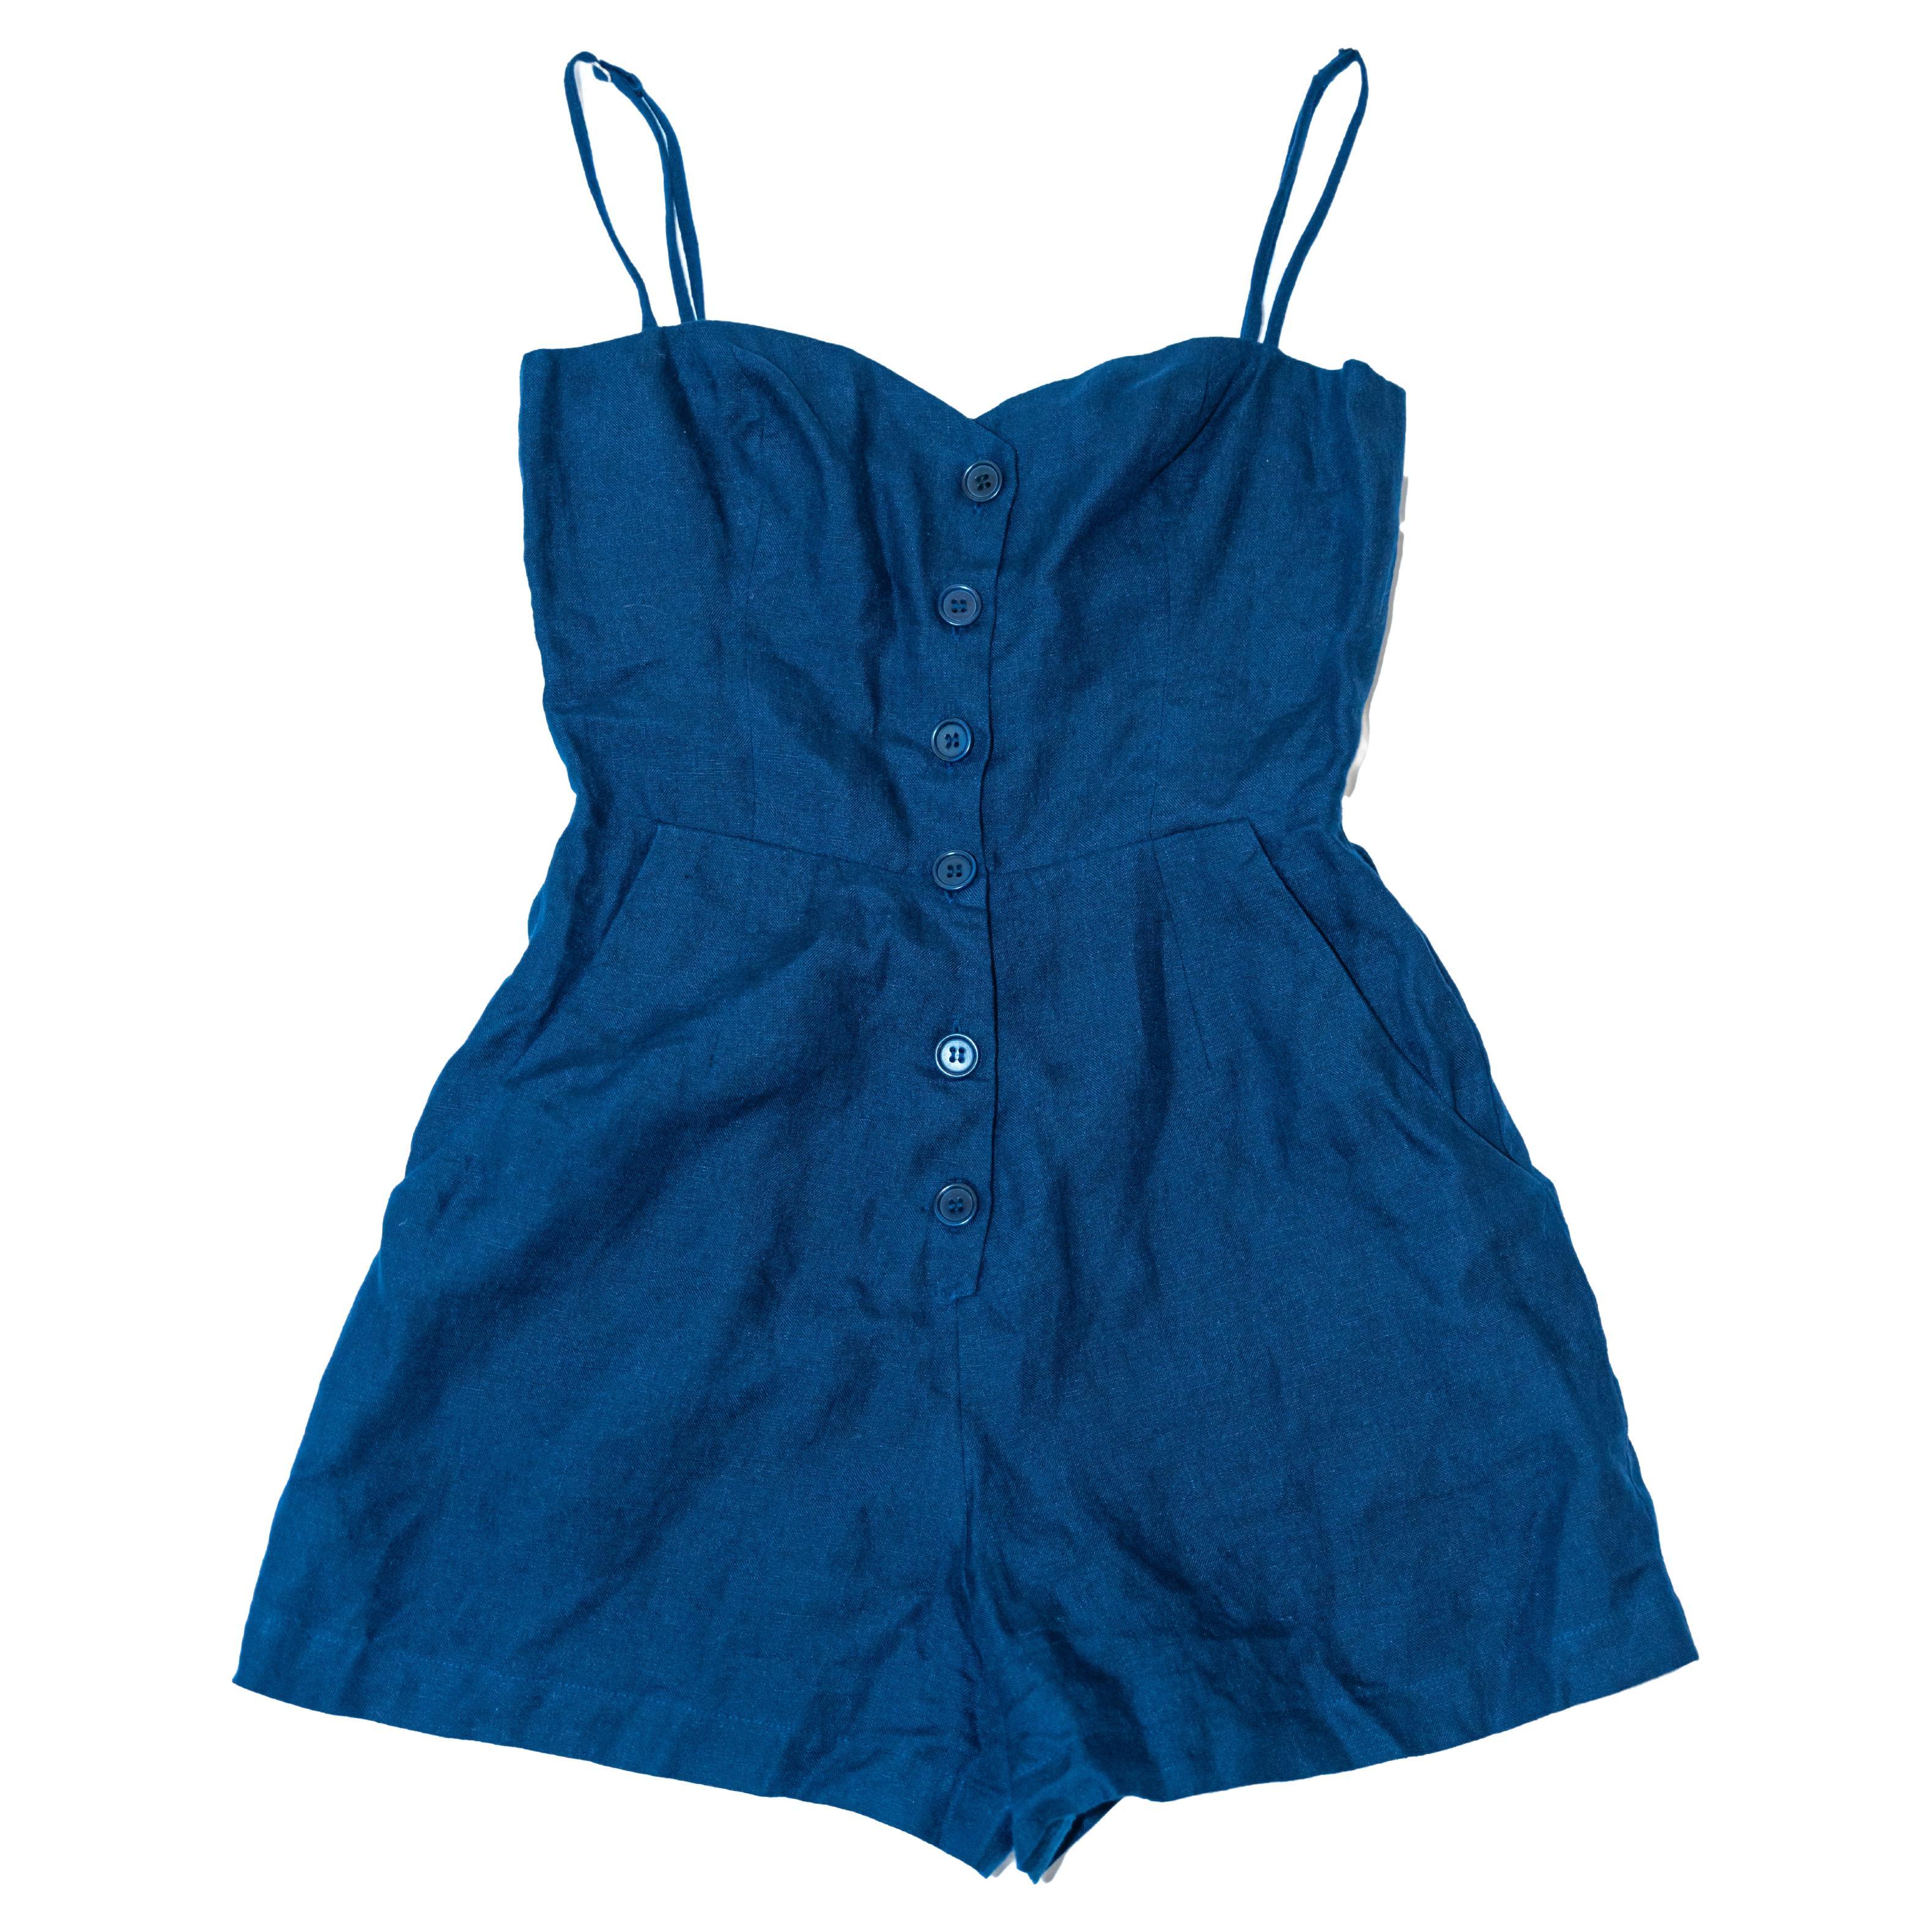 Blue Linen Playsuit by Reformation For Sale